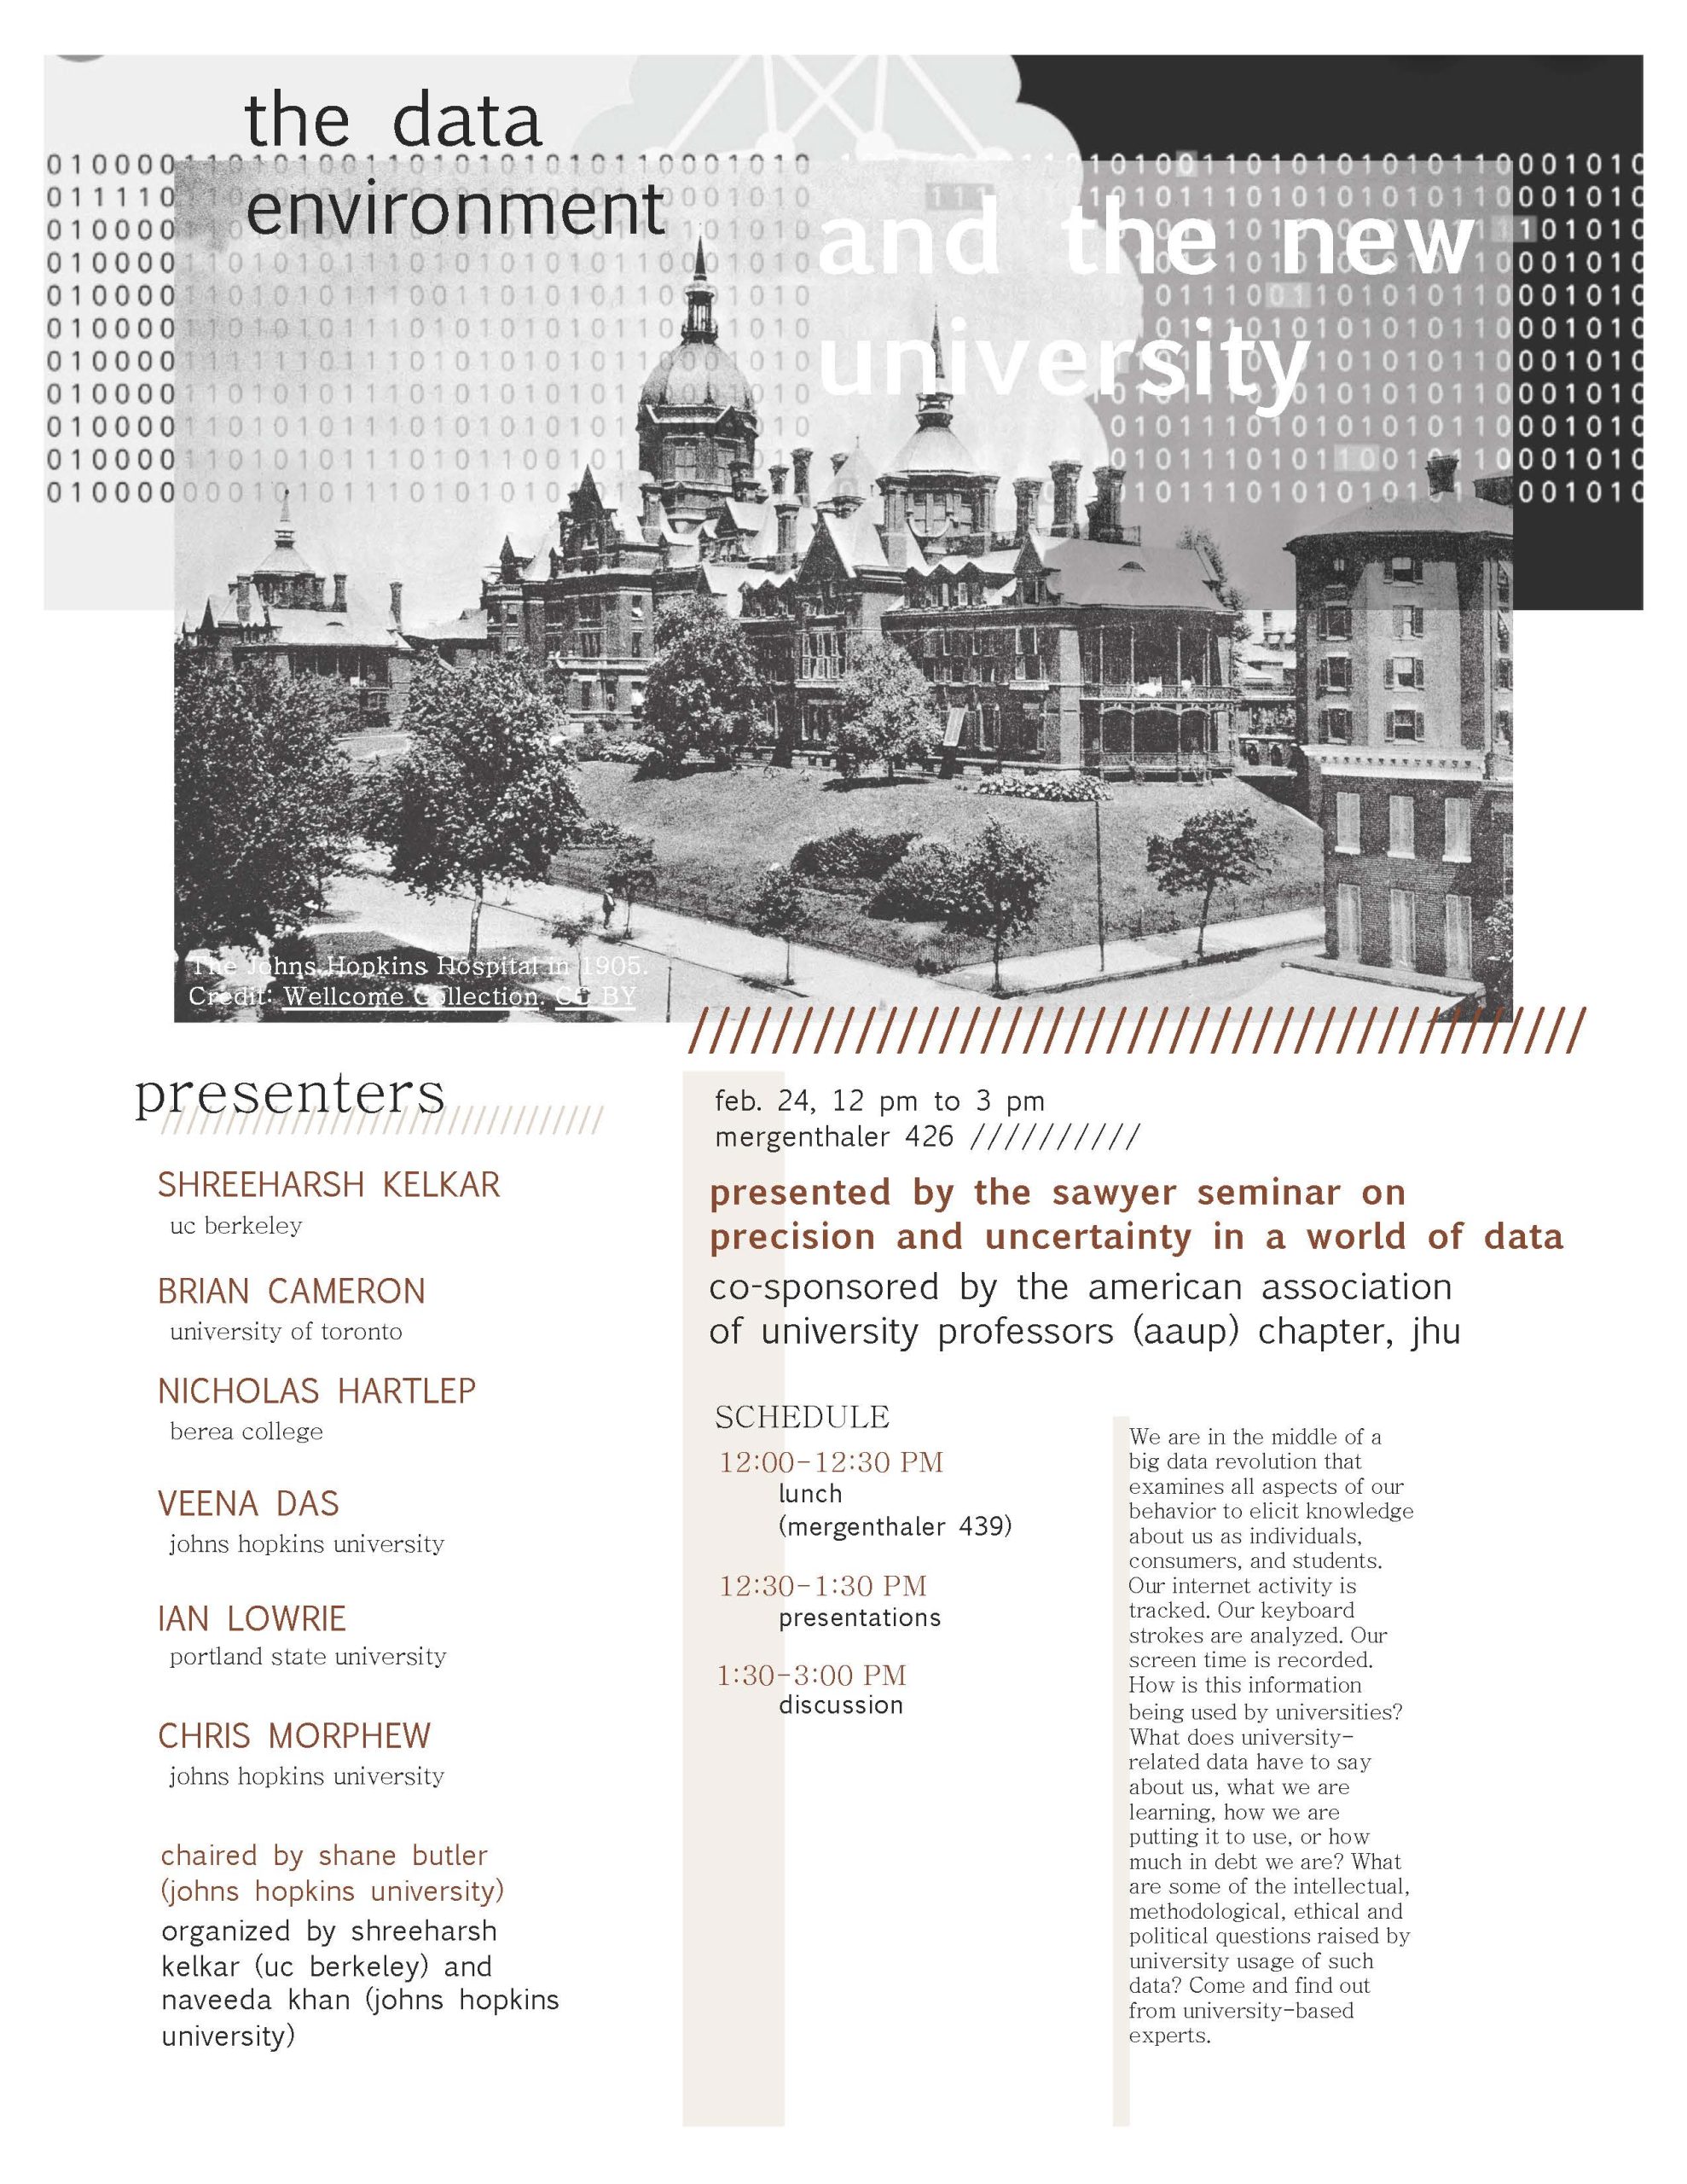 Sawyer Seminar on Precision and Uncertainty in a World of Data Presents